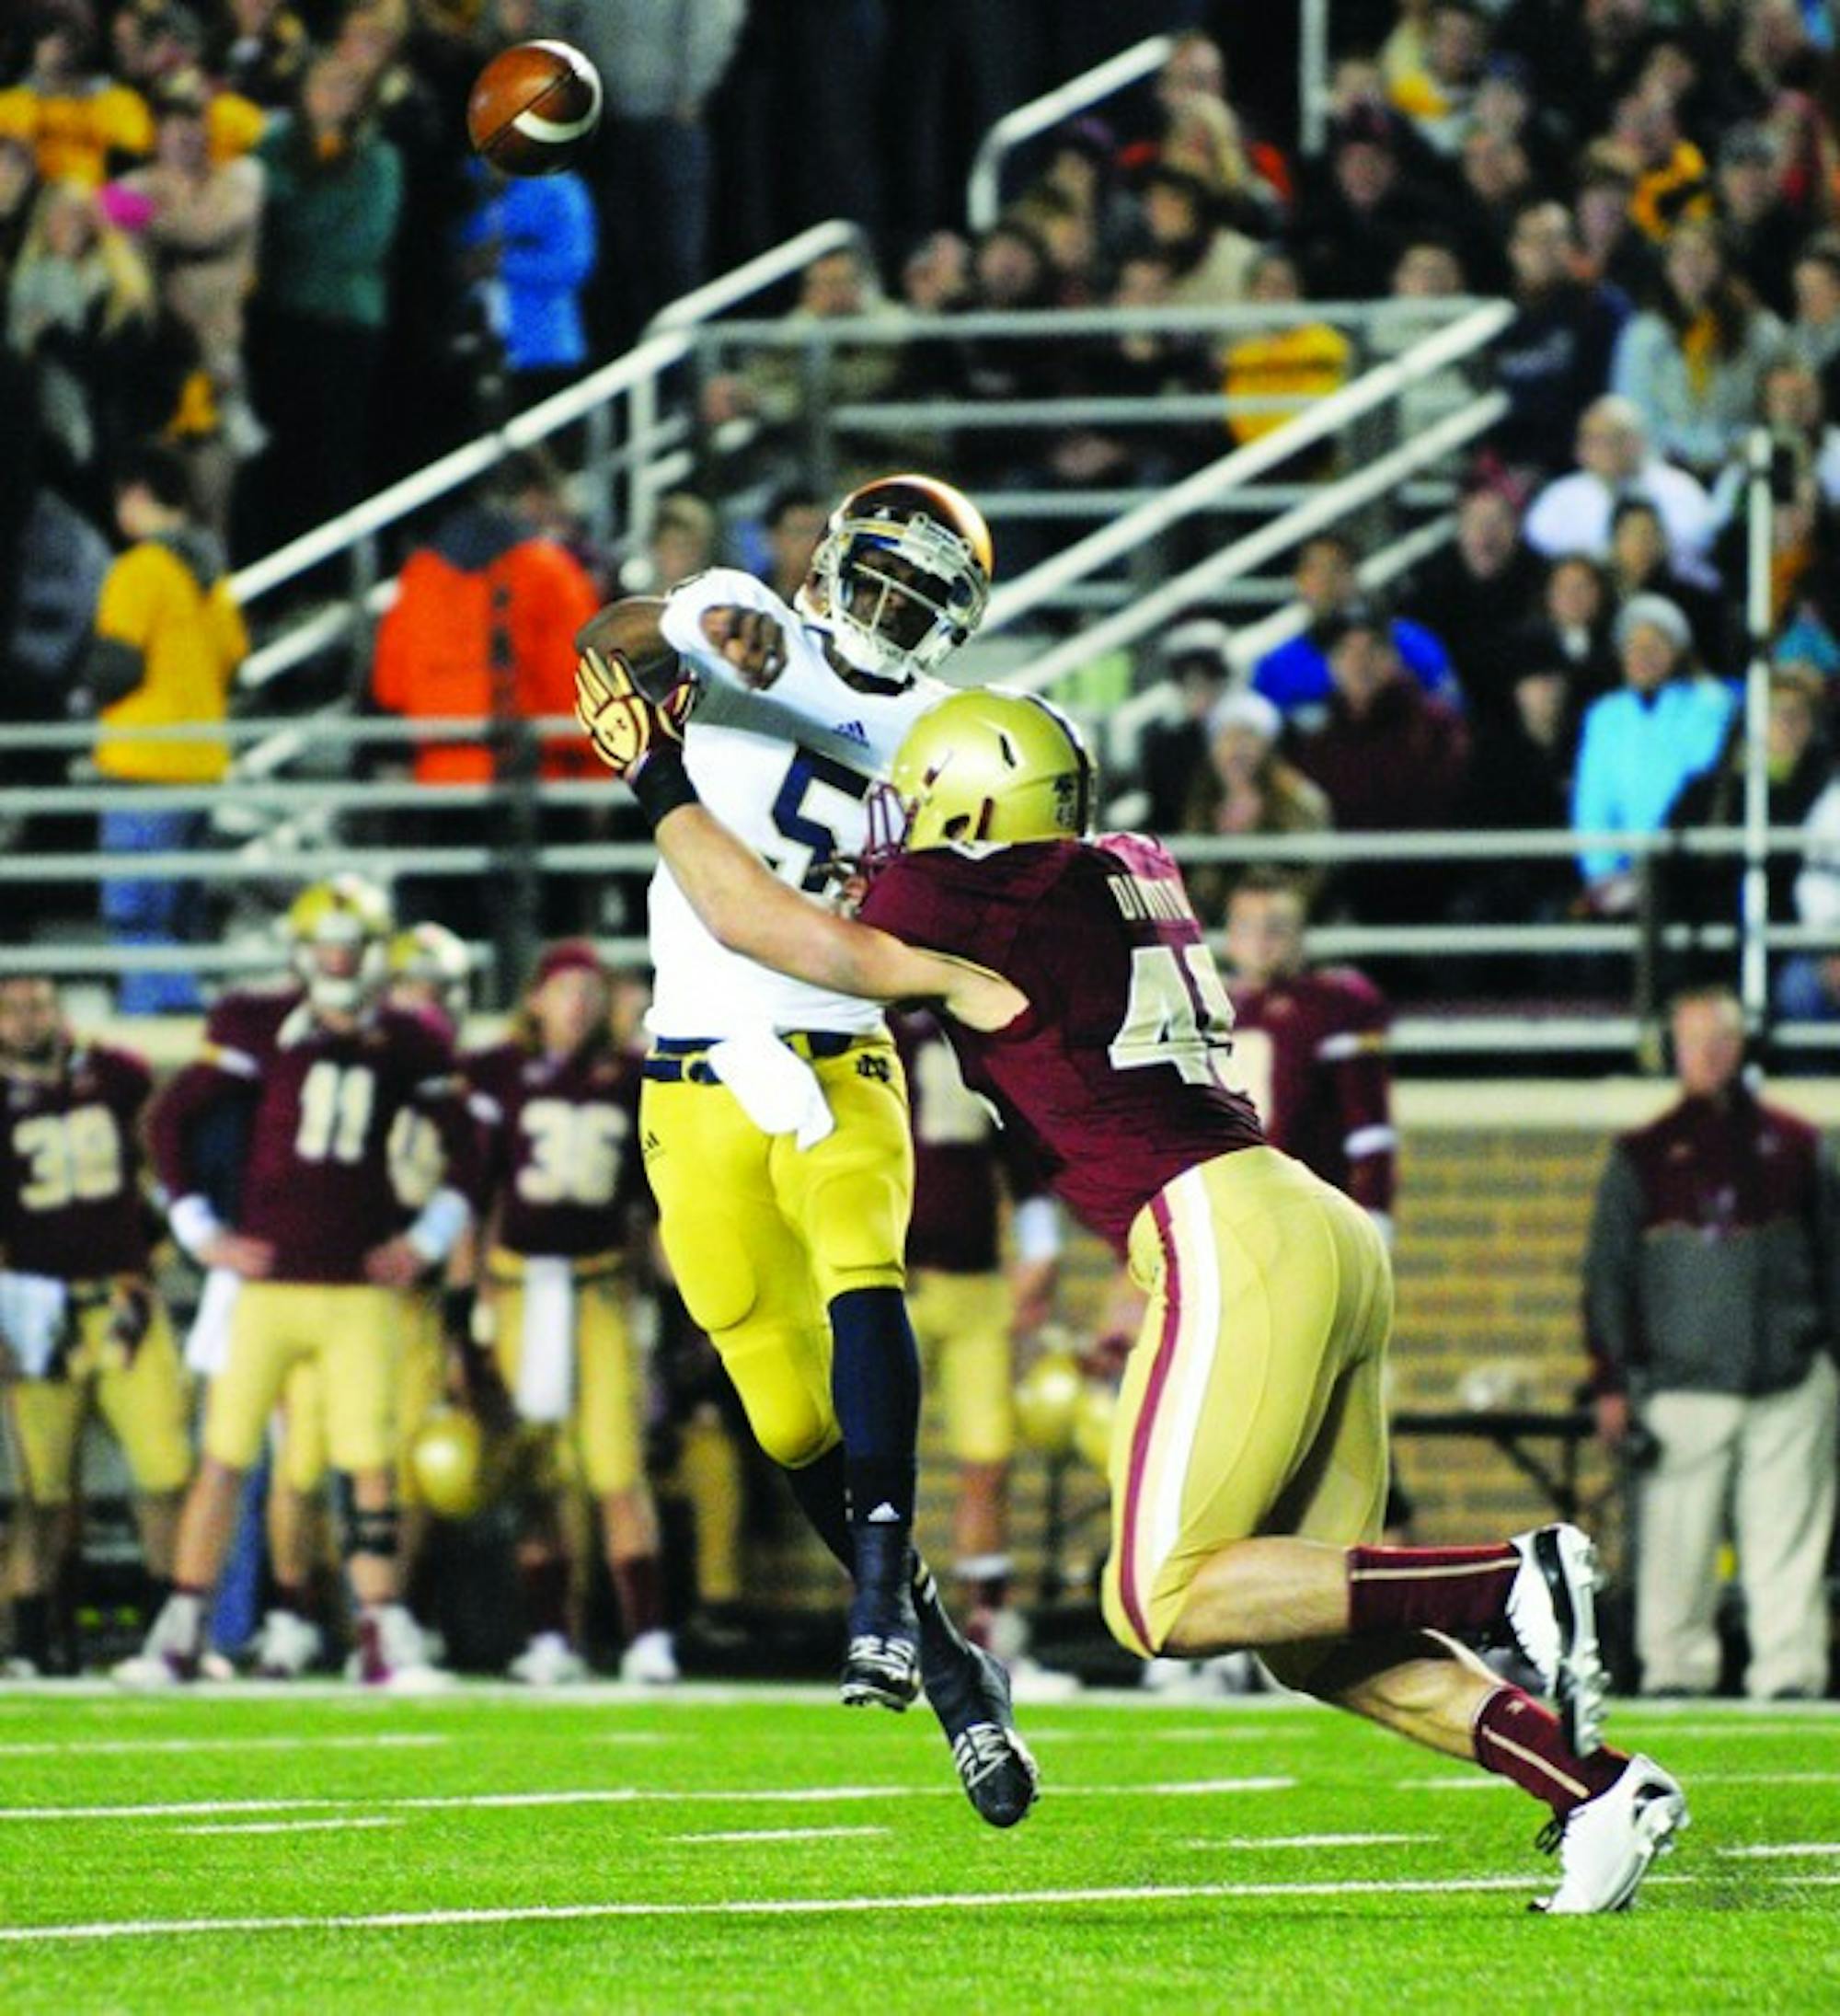 Former Irish quarterback Everett Golson is hit by a Boston College defender as he throws during Notre Dame’s 21-6 win at Alumni Stadium in Boston on Nov. 10, 2012.